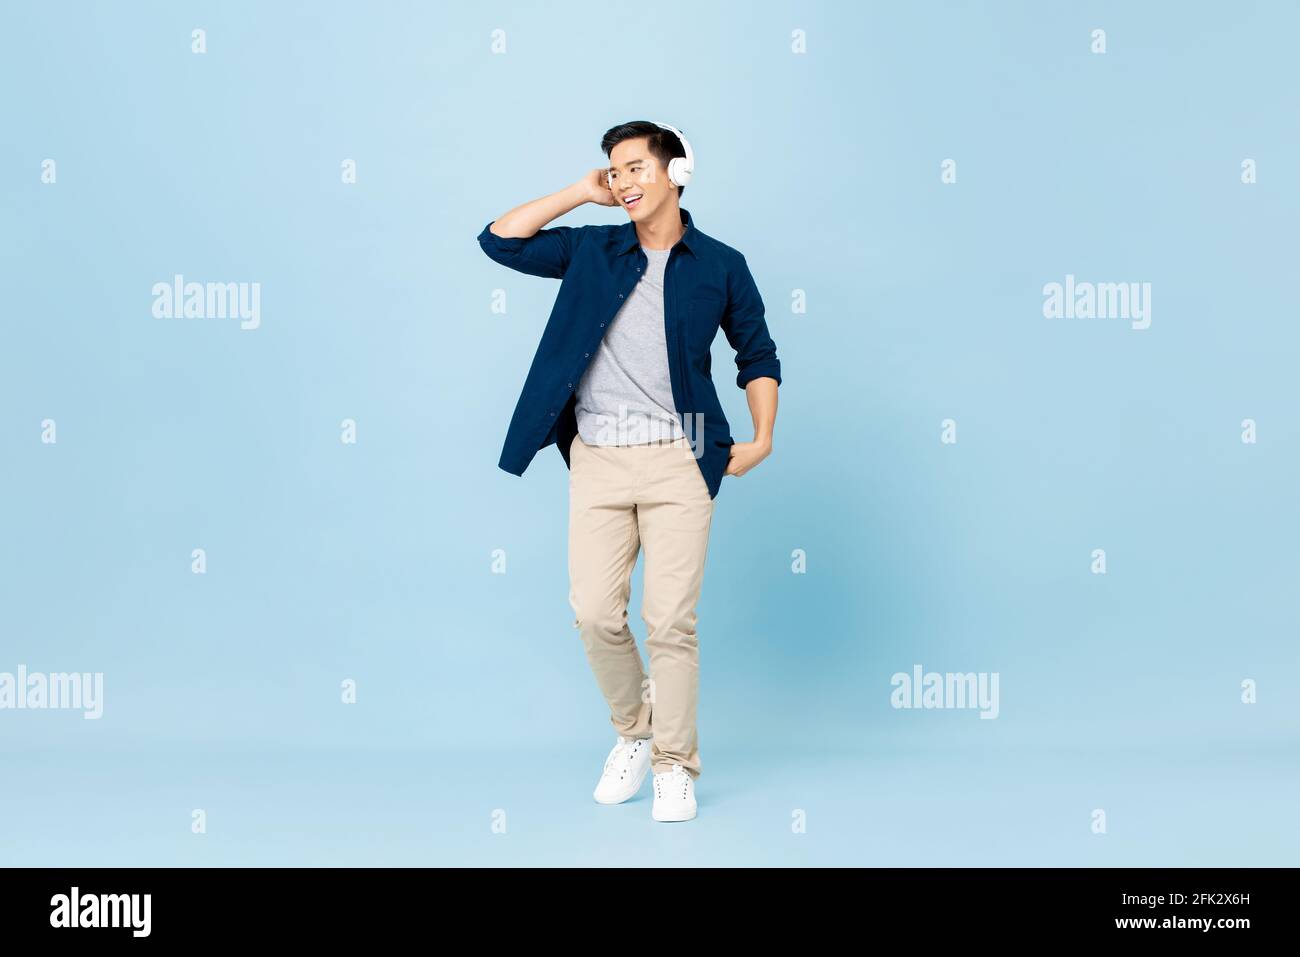 Full body portrait of smiling young handsome Asian man listening to music with wireless headphones isolated on light blue studio background Stock Photo